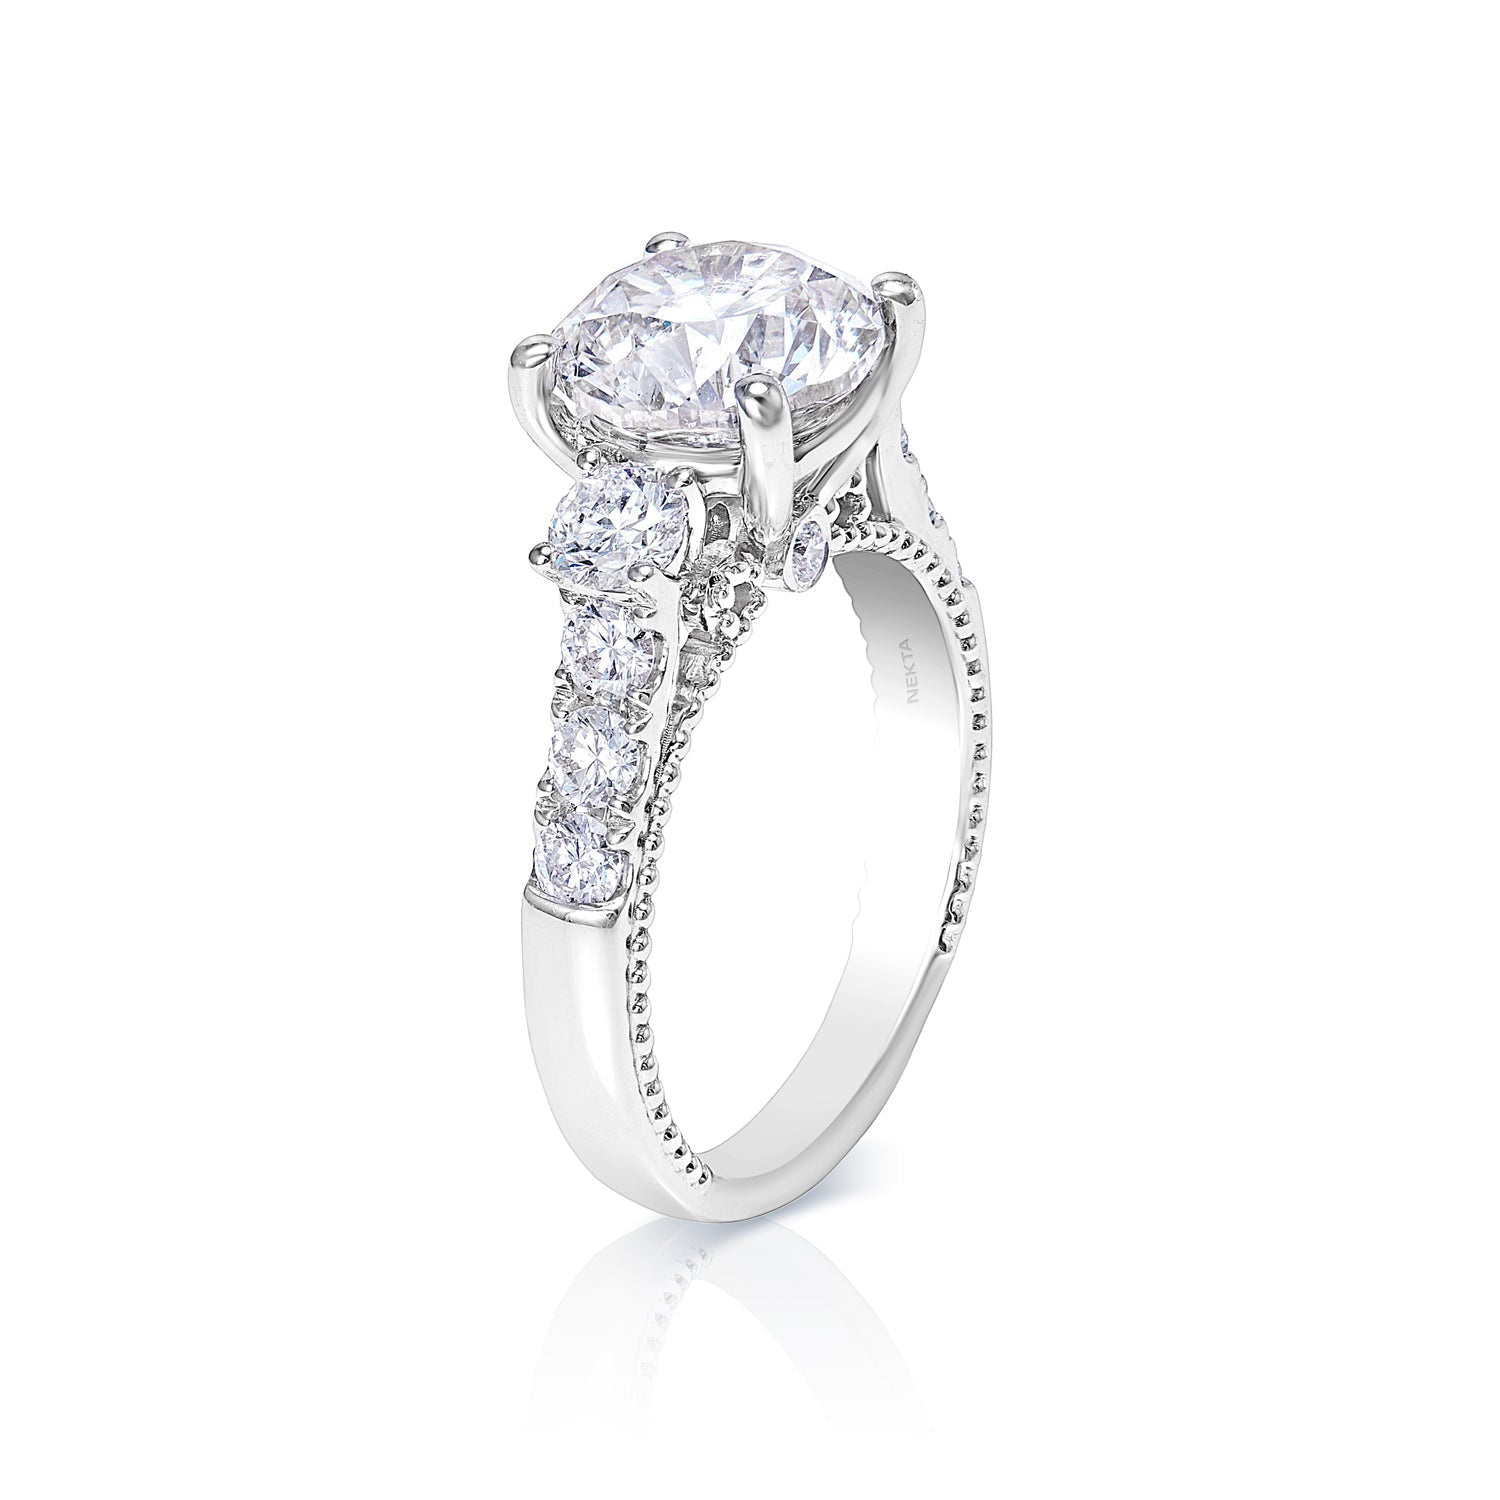 Aviana 4 Carat G VS2 Round Brilliant Cut Diamond Engagement Ring in 18kt White Gold SIde View